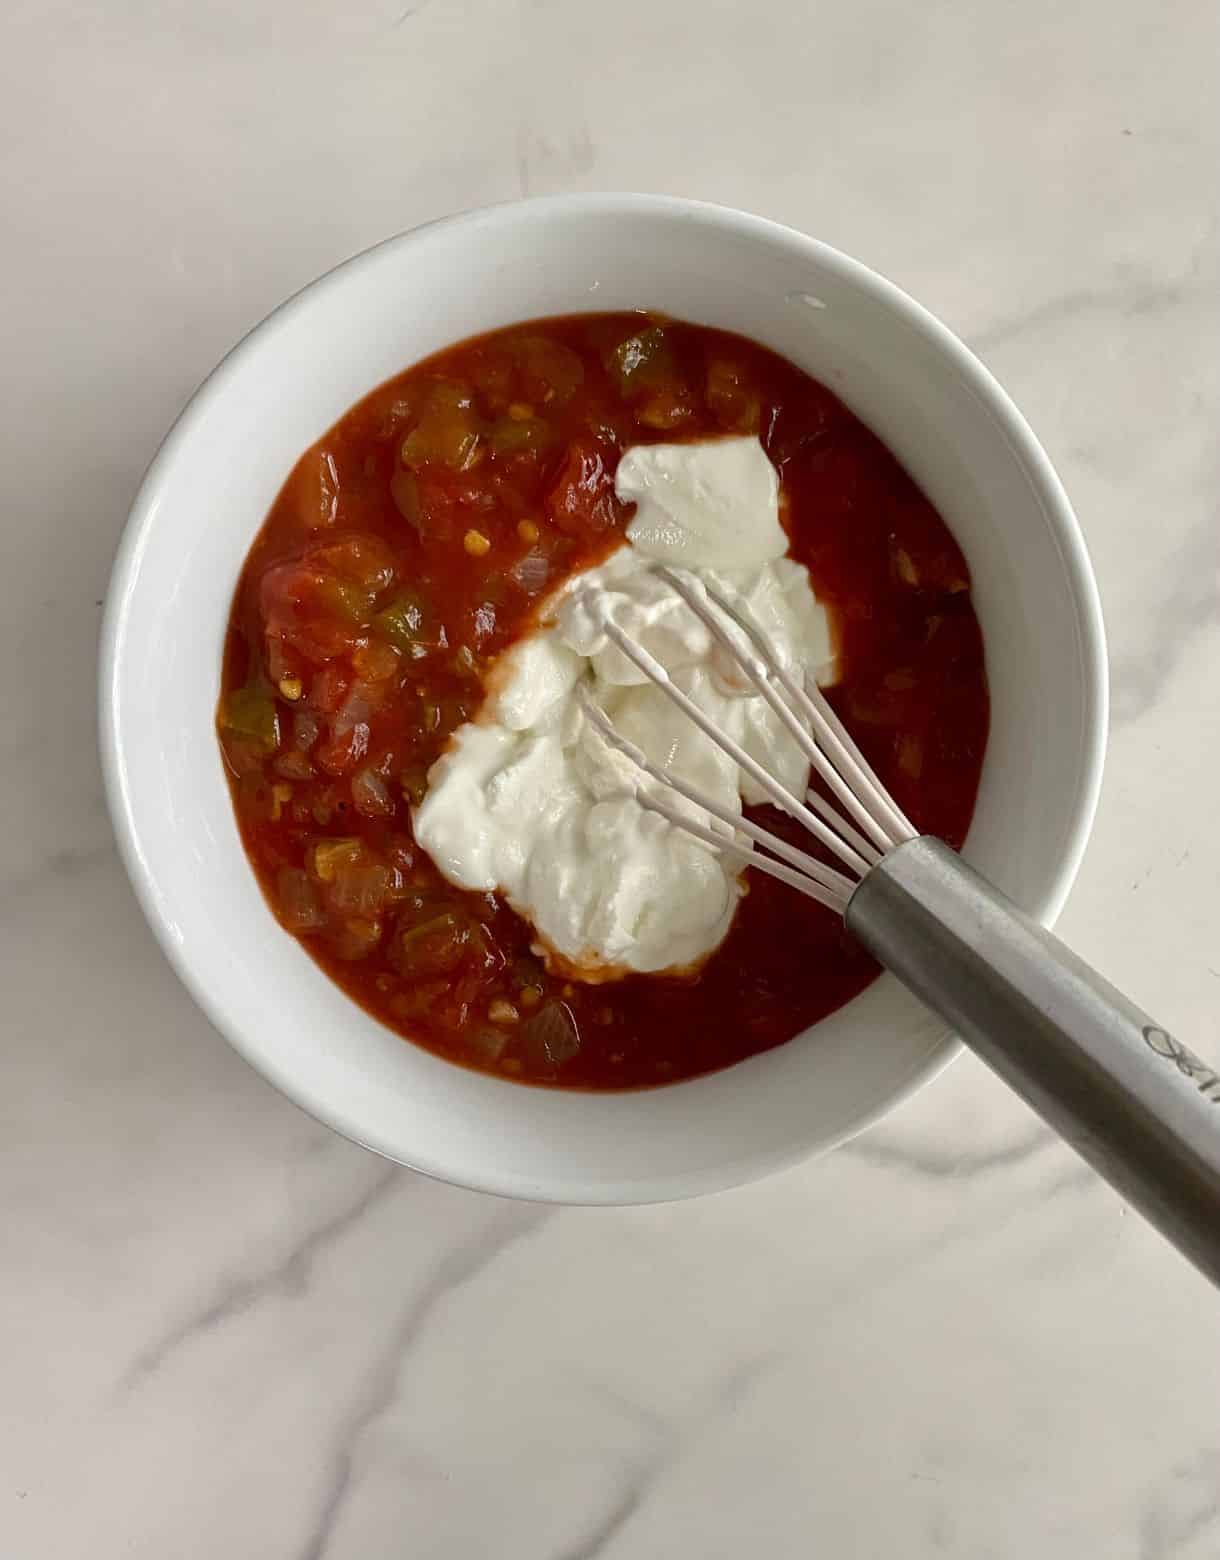 A bowl with salsa, sour cream and a whisk.